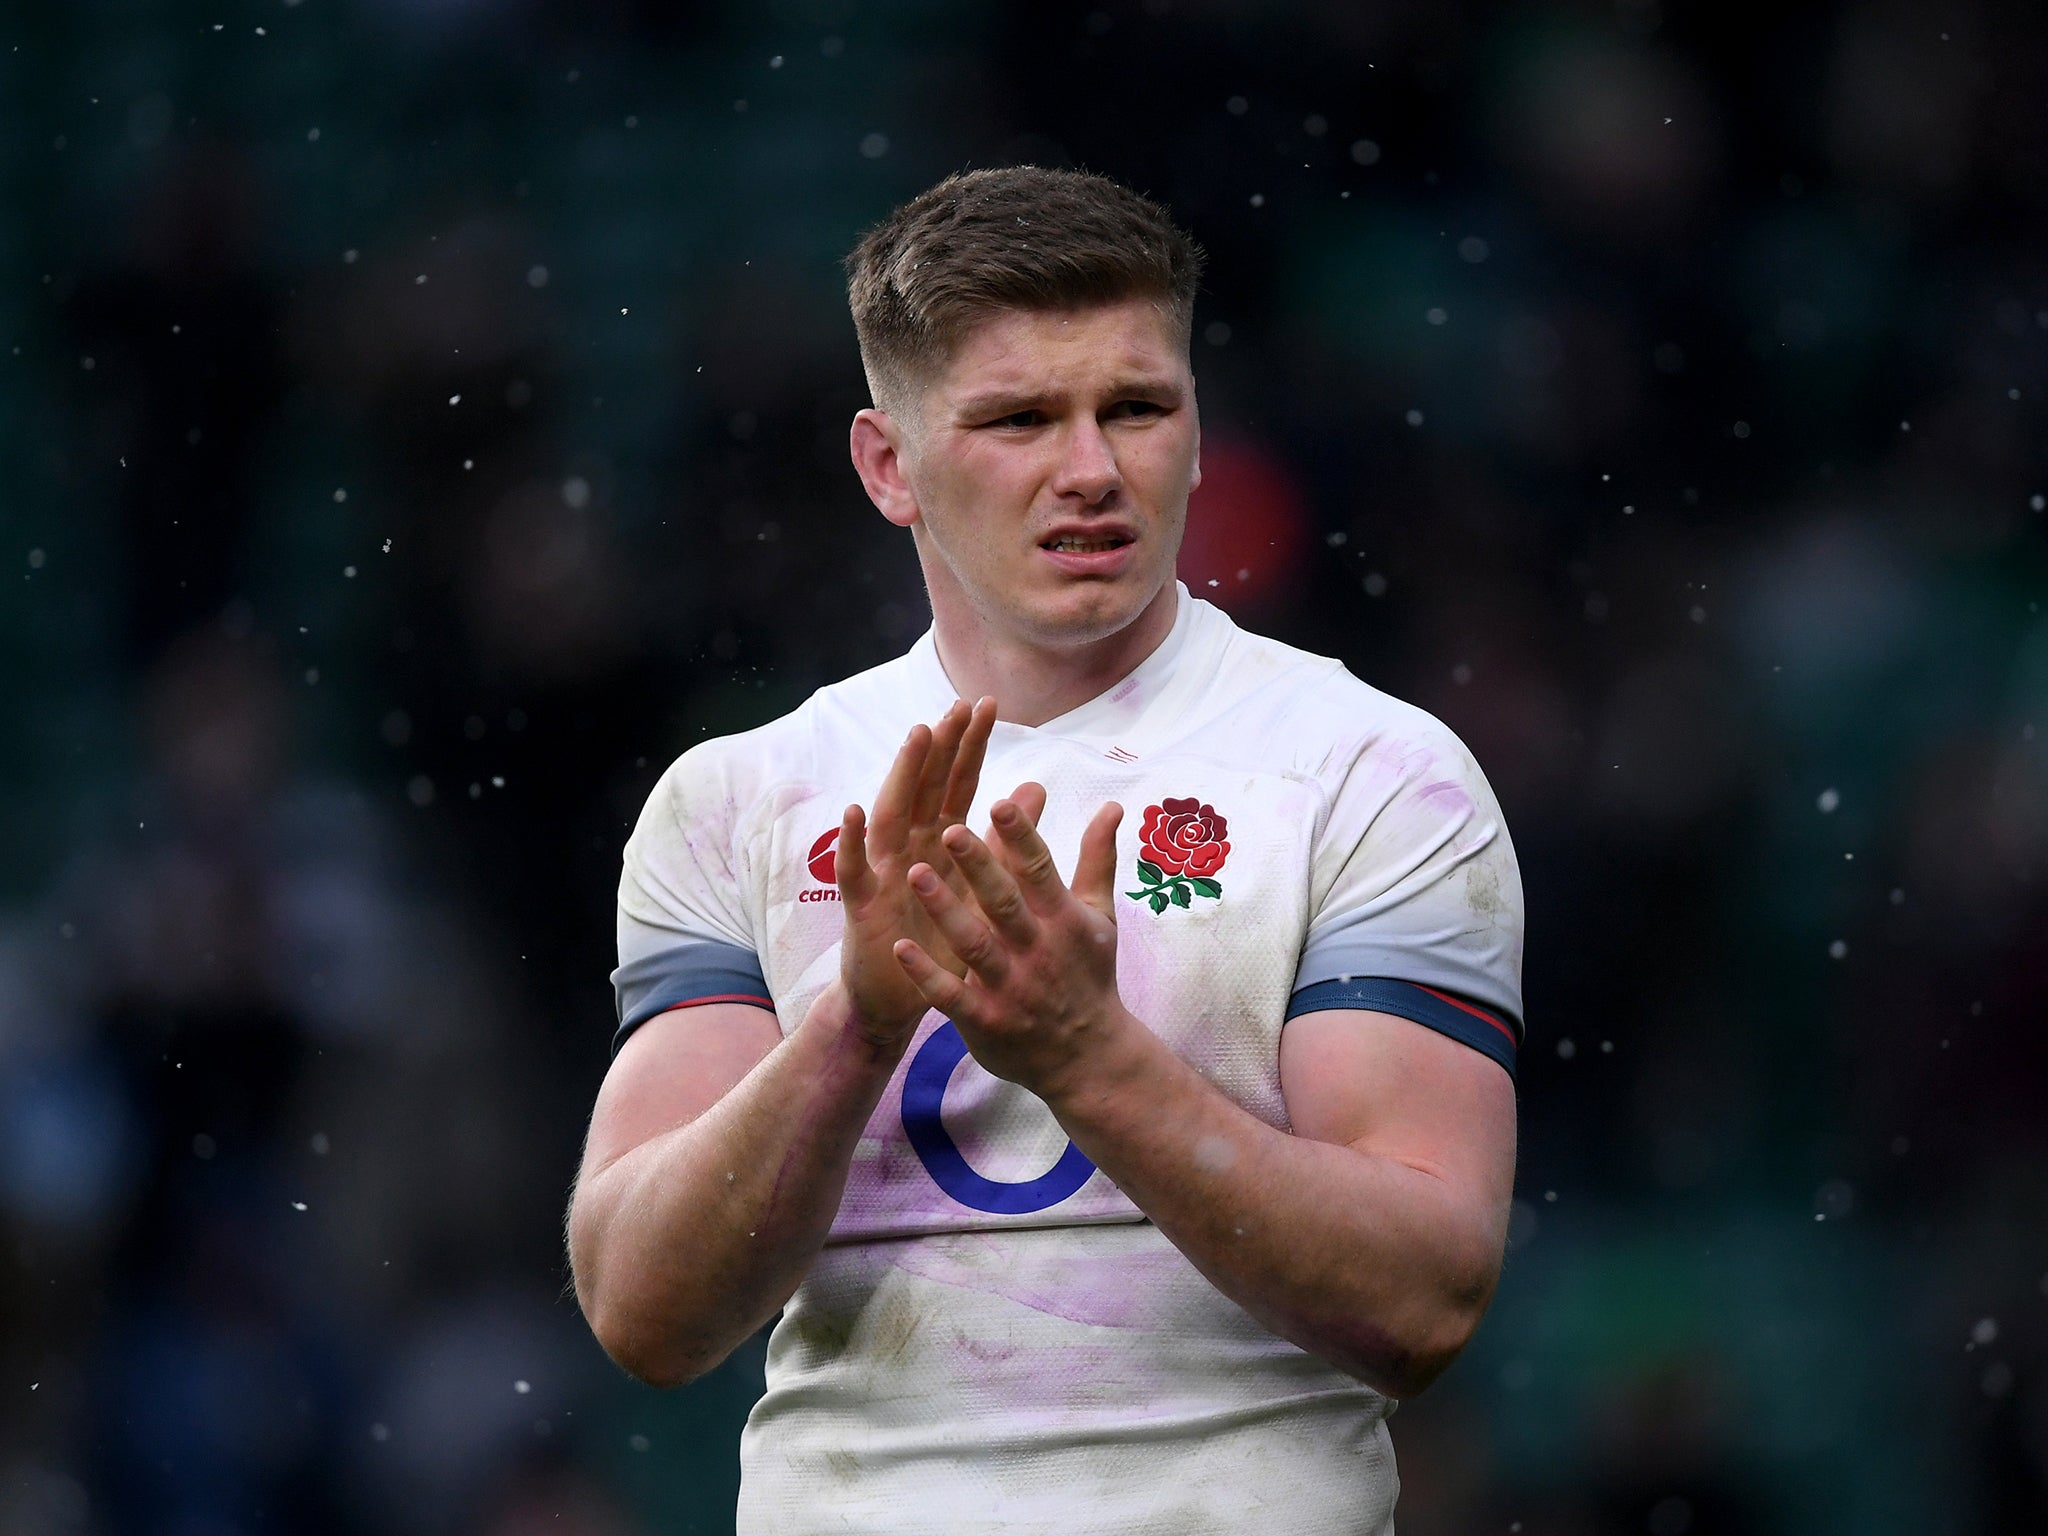 Owen Farrell may have been rested for the tour of South Africa but Dylan Hartley's injury could change those plans